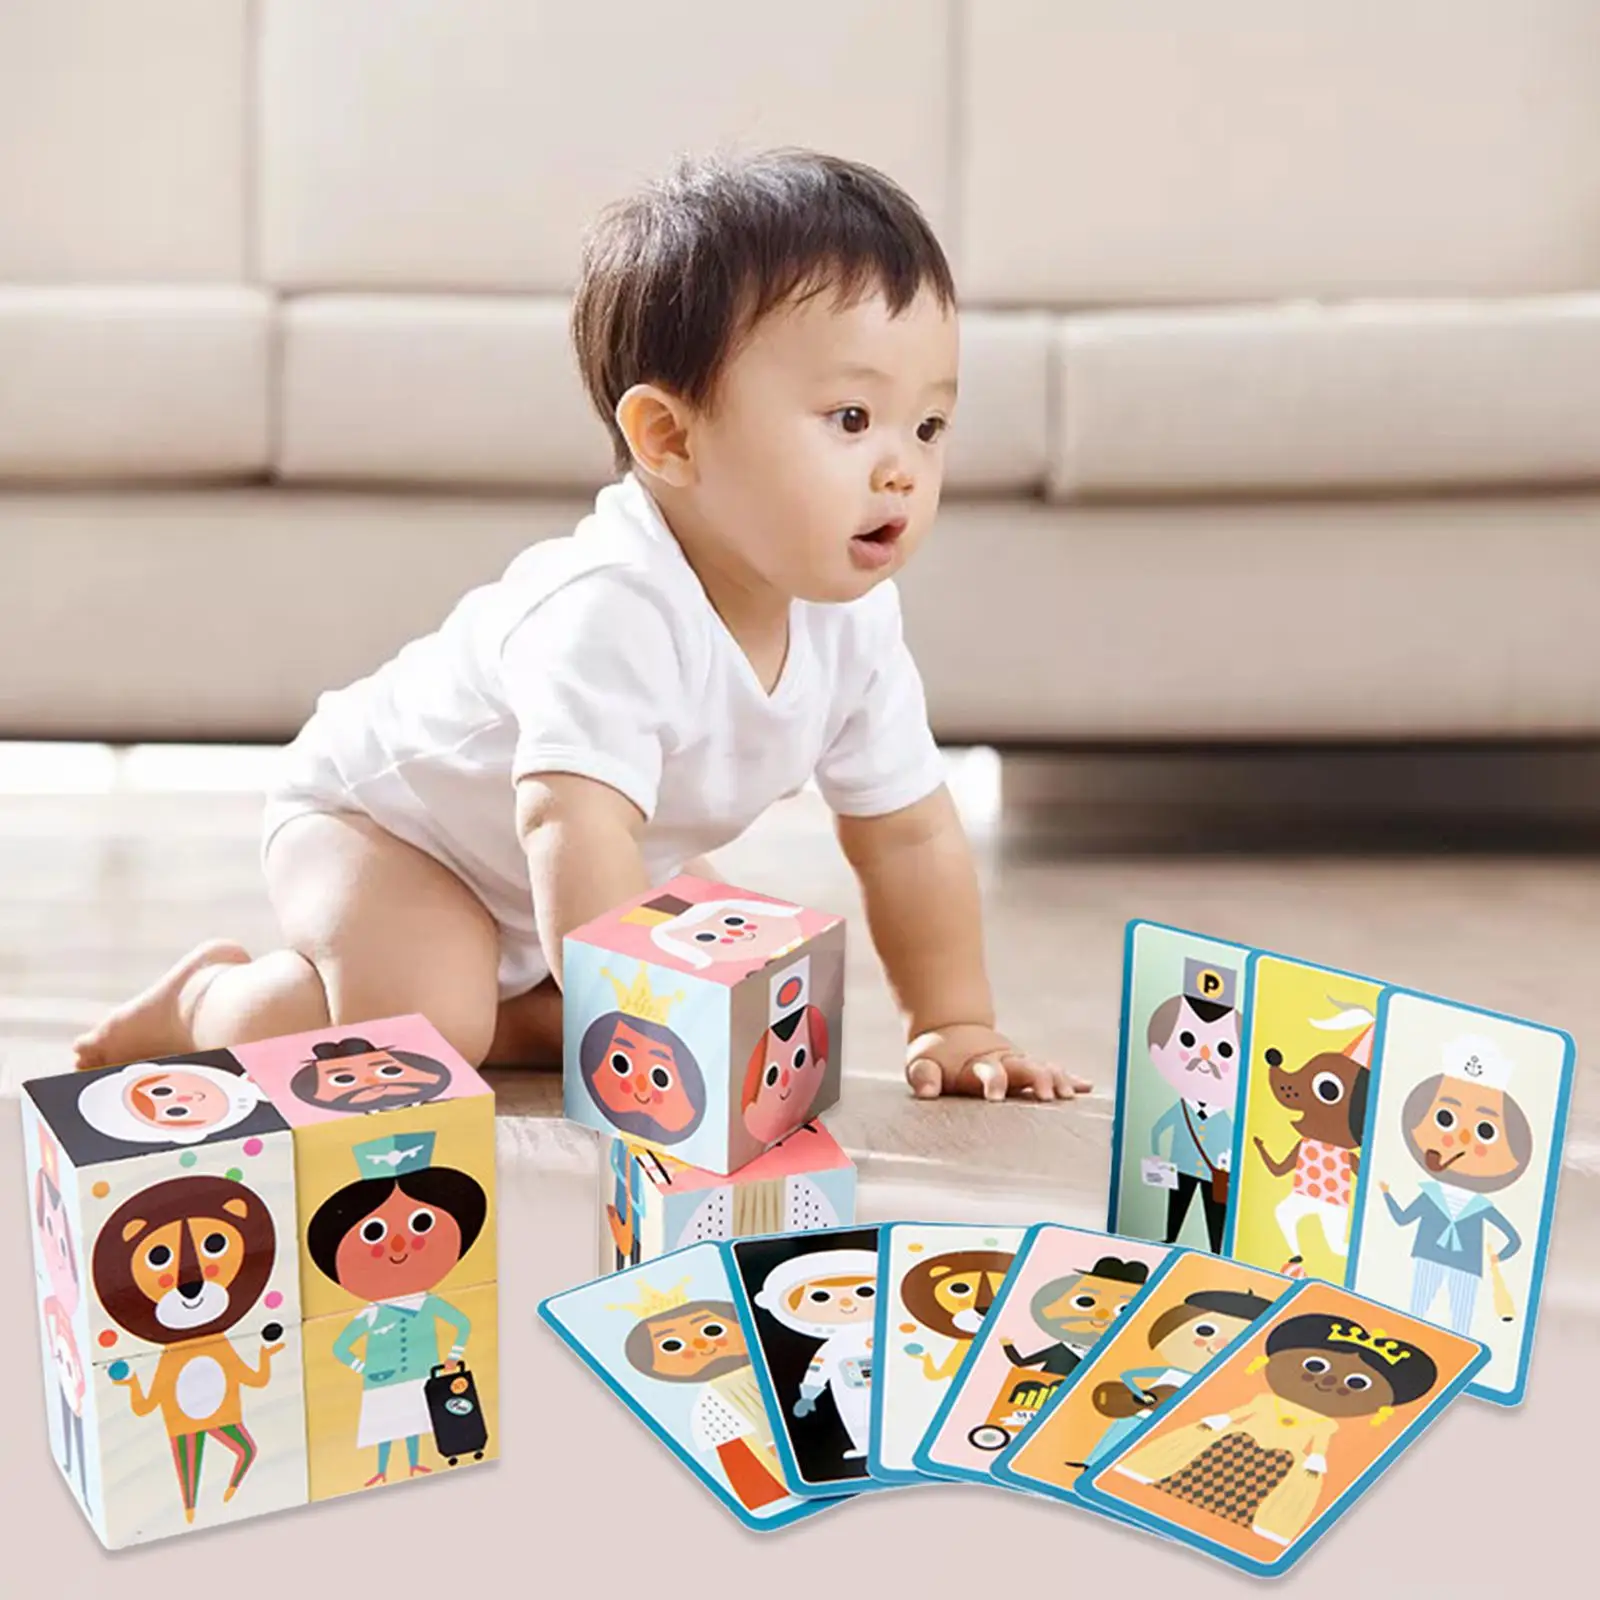 Wooden Toys Logical Thinking Gifts Educational Fine Motor Skills Interactive Fun Wood Jigsaw Puzzles for Travel Family Children